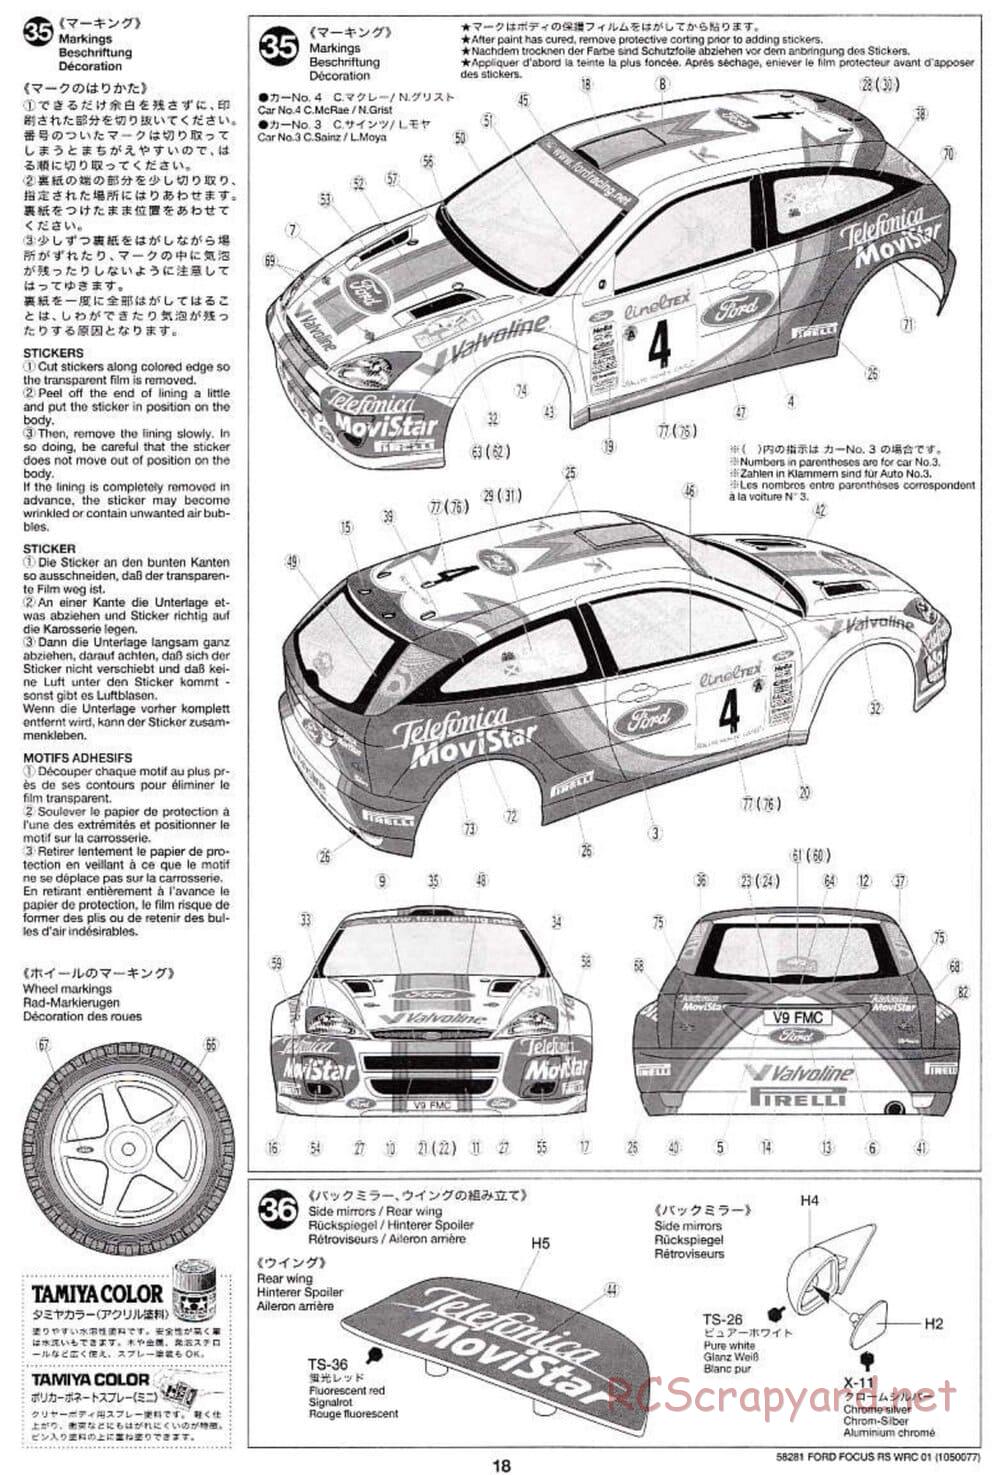 Tamiya - Ford Focus RS WRC 01 - TB-01 Chassis - Manual - Page 18